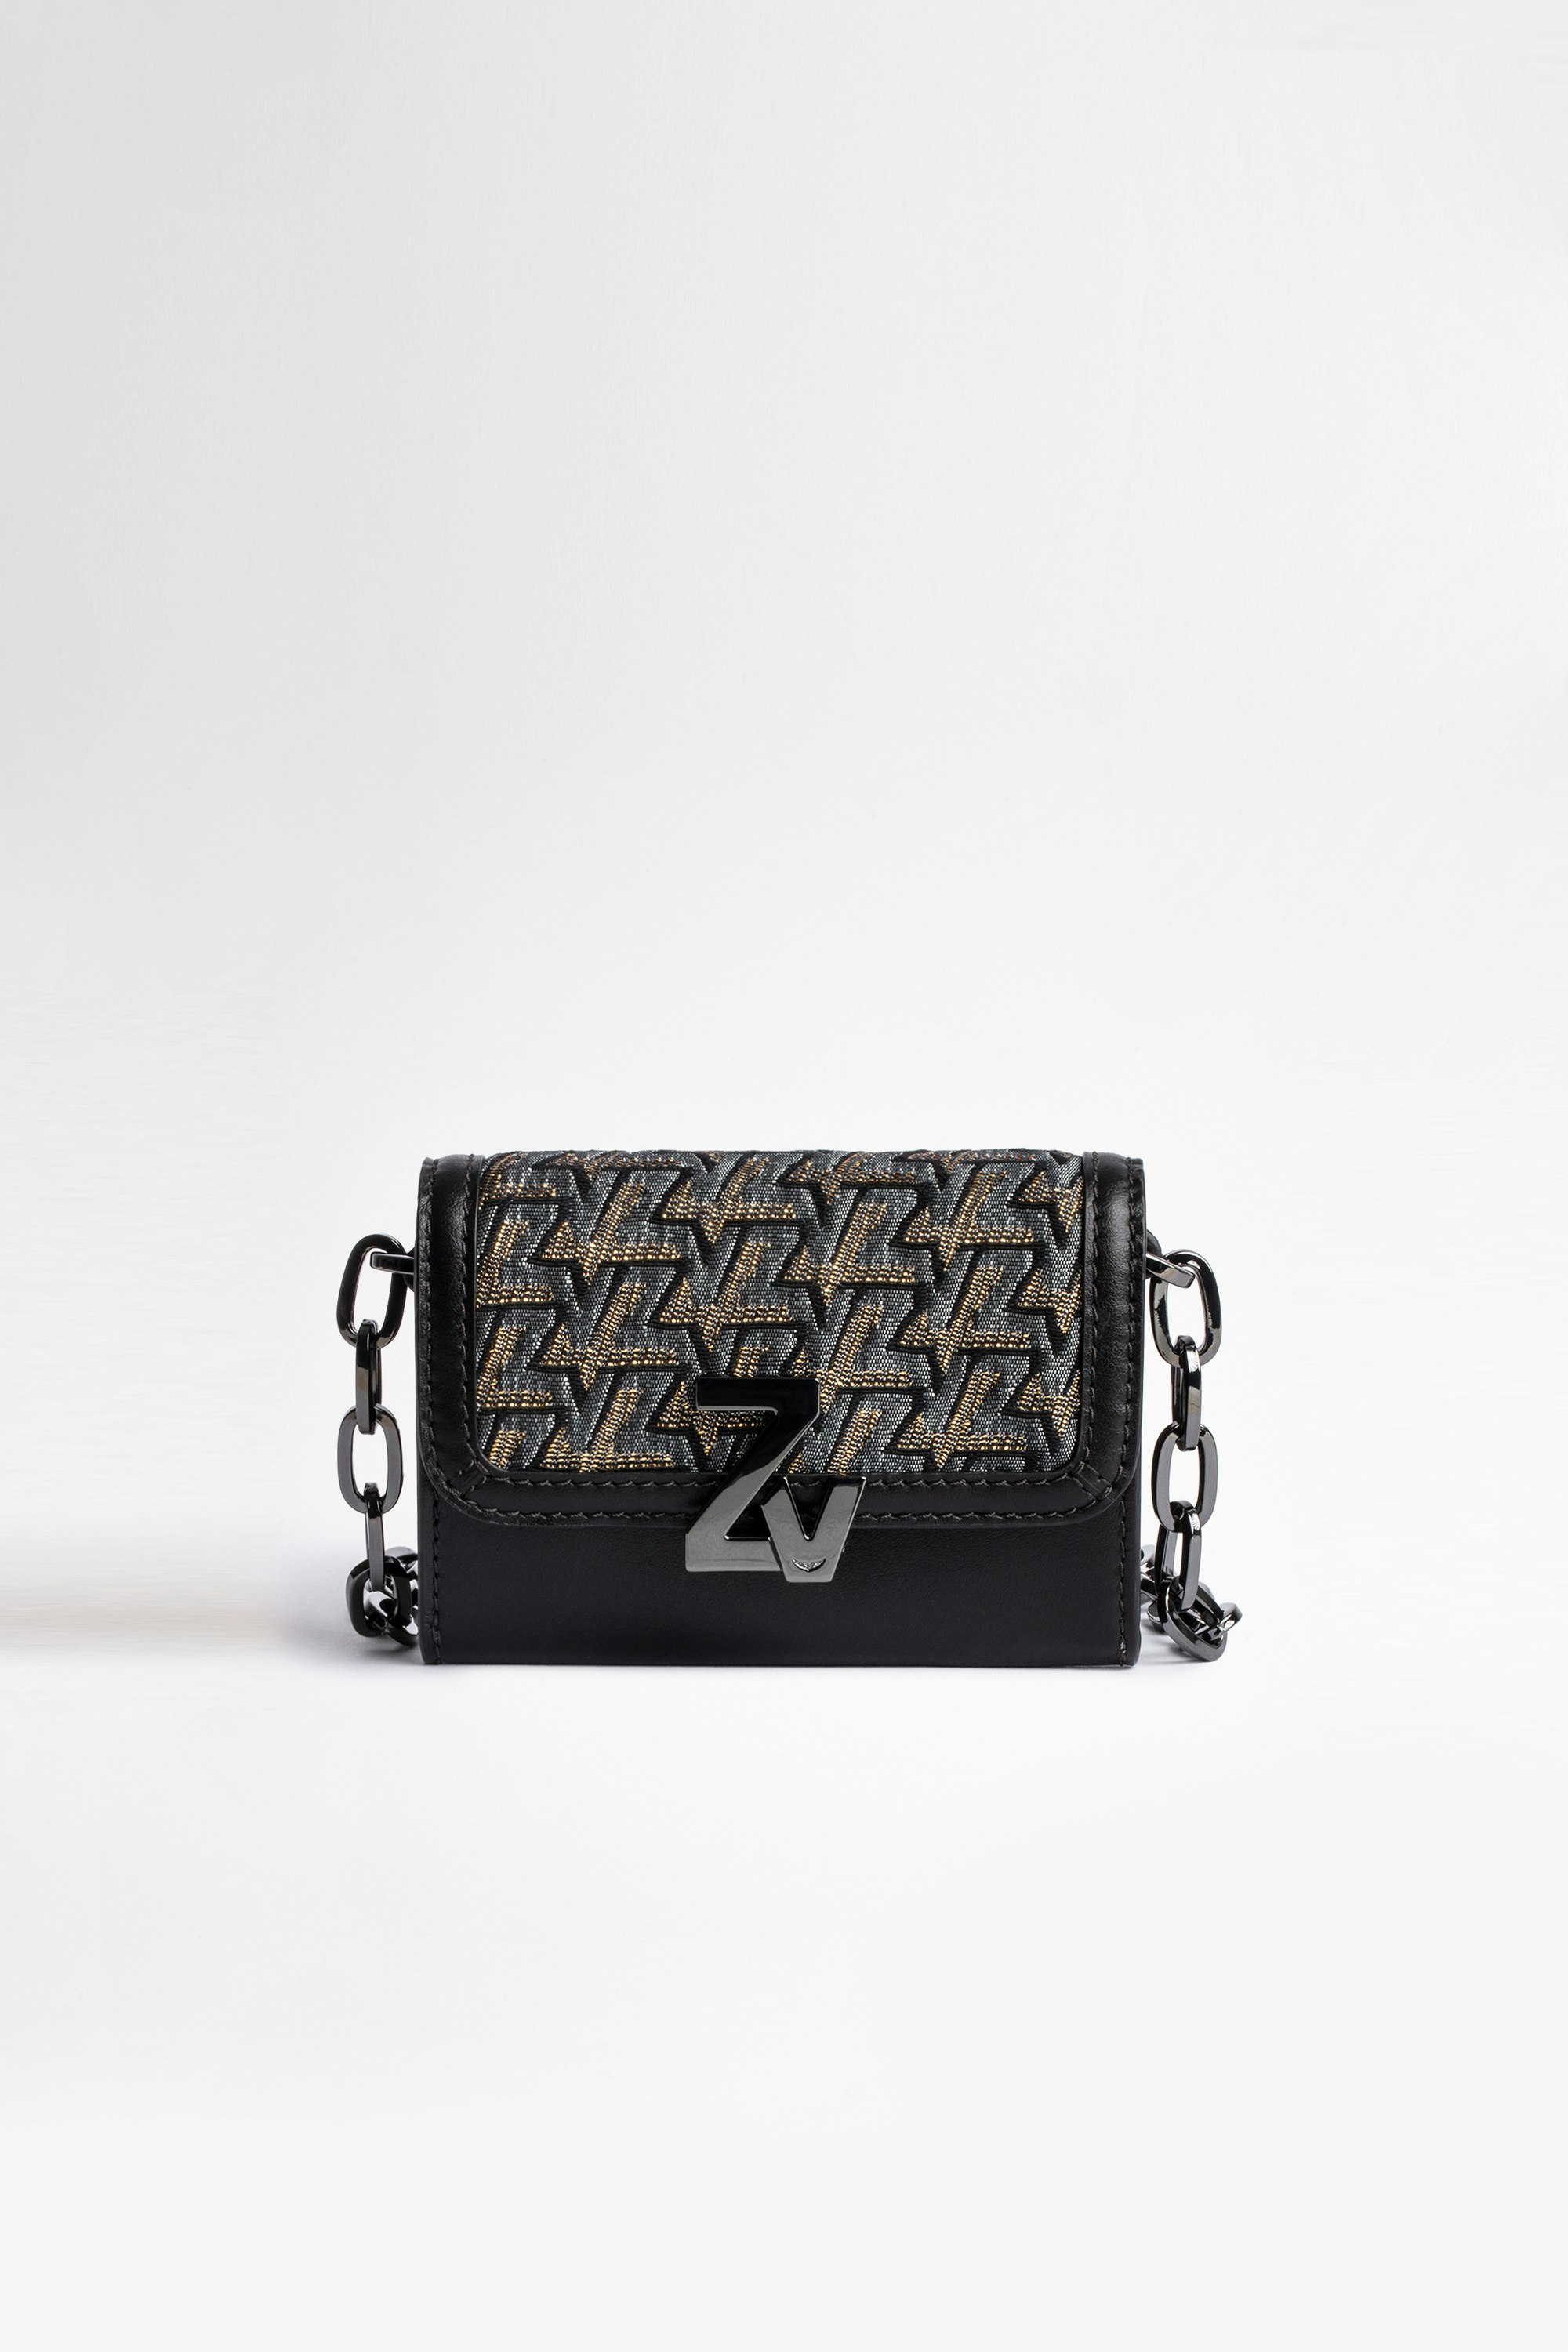 ZV Initiale Le Tiny Unchained Wallet-Style Clutch Women's clutch bag in leather and ZV street jacquard